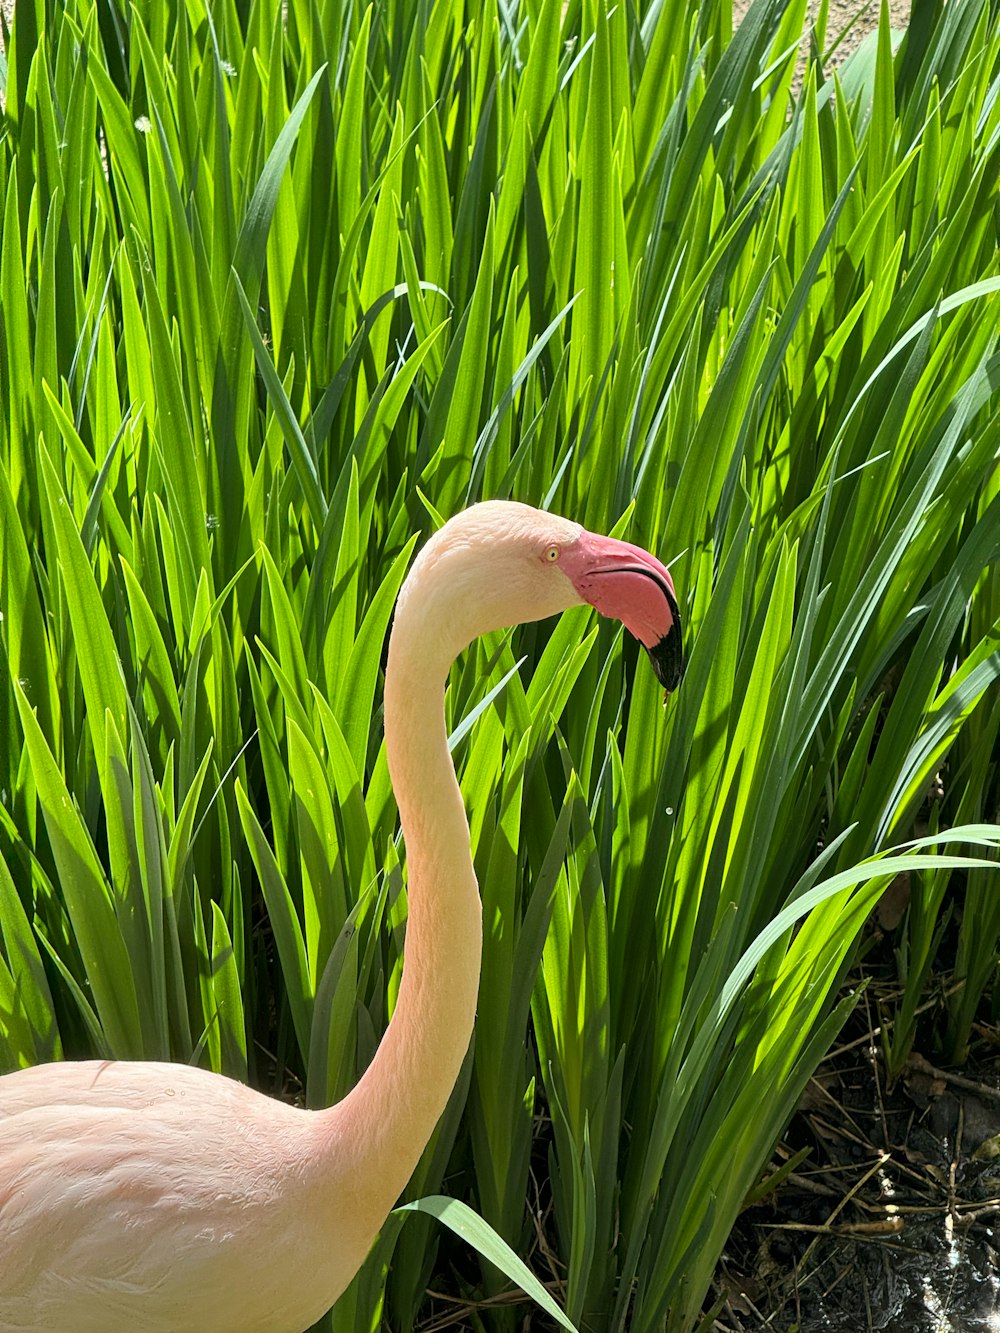 a pink flamingo standing in a field of green grass